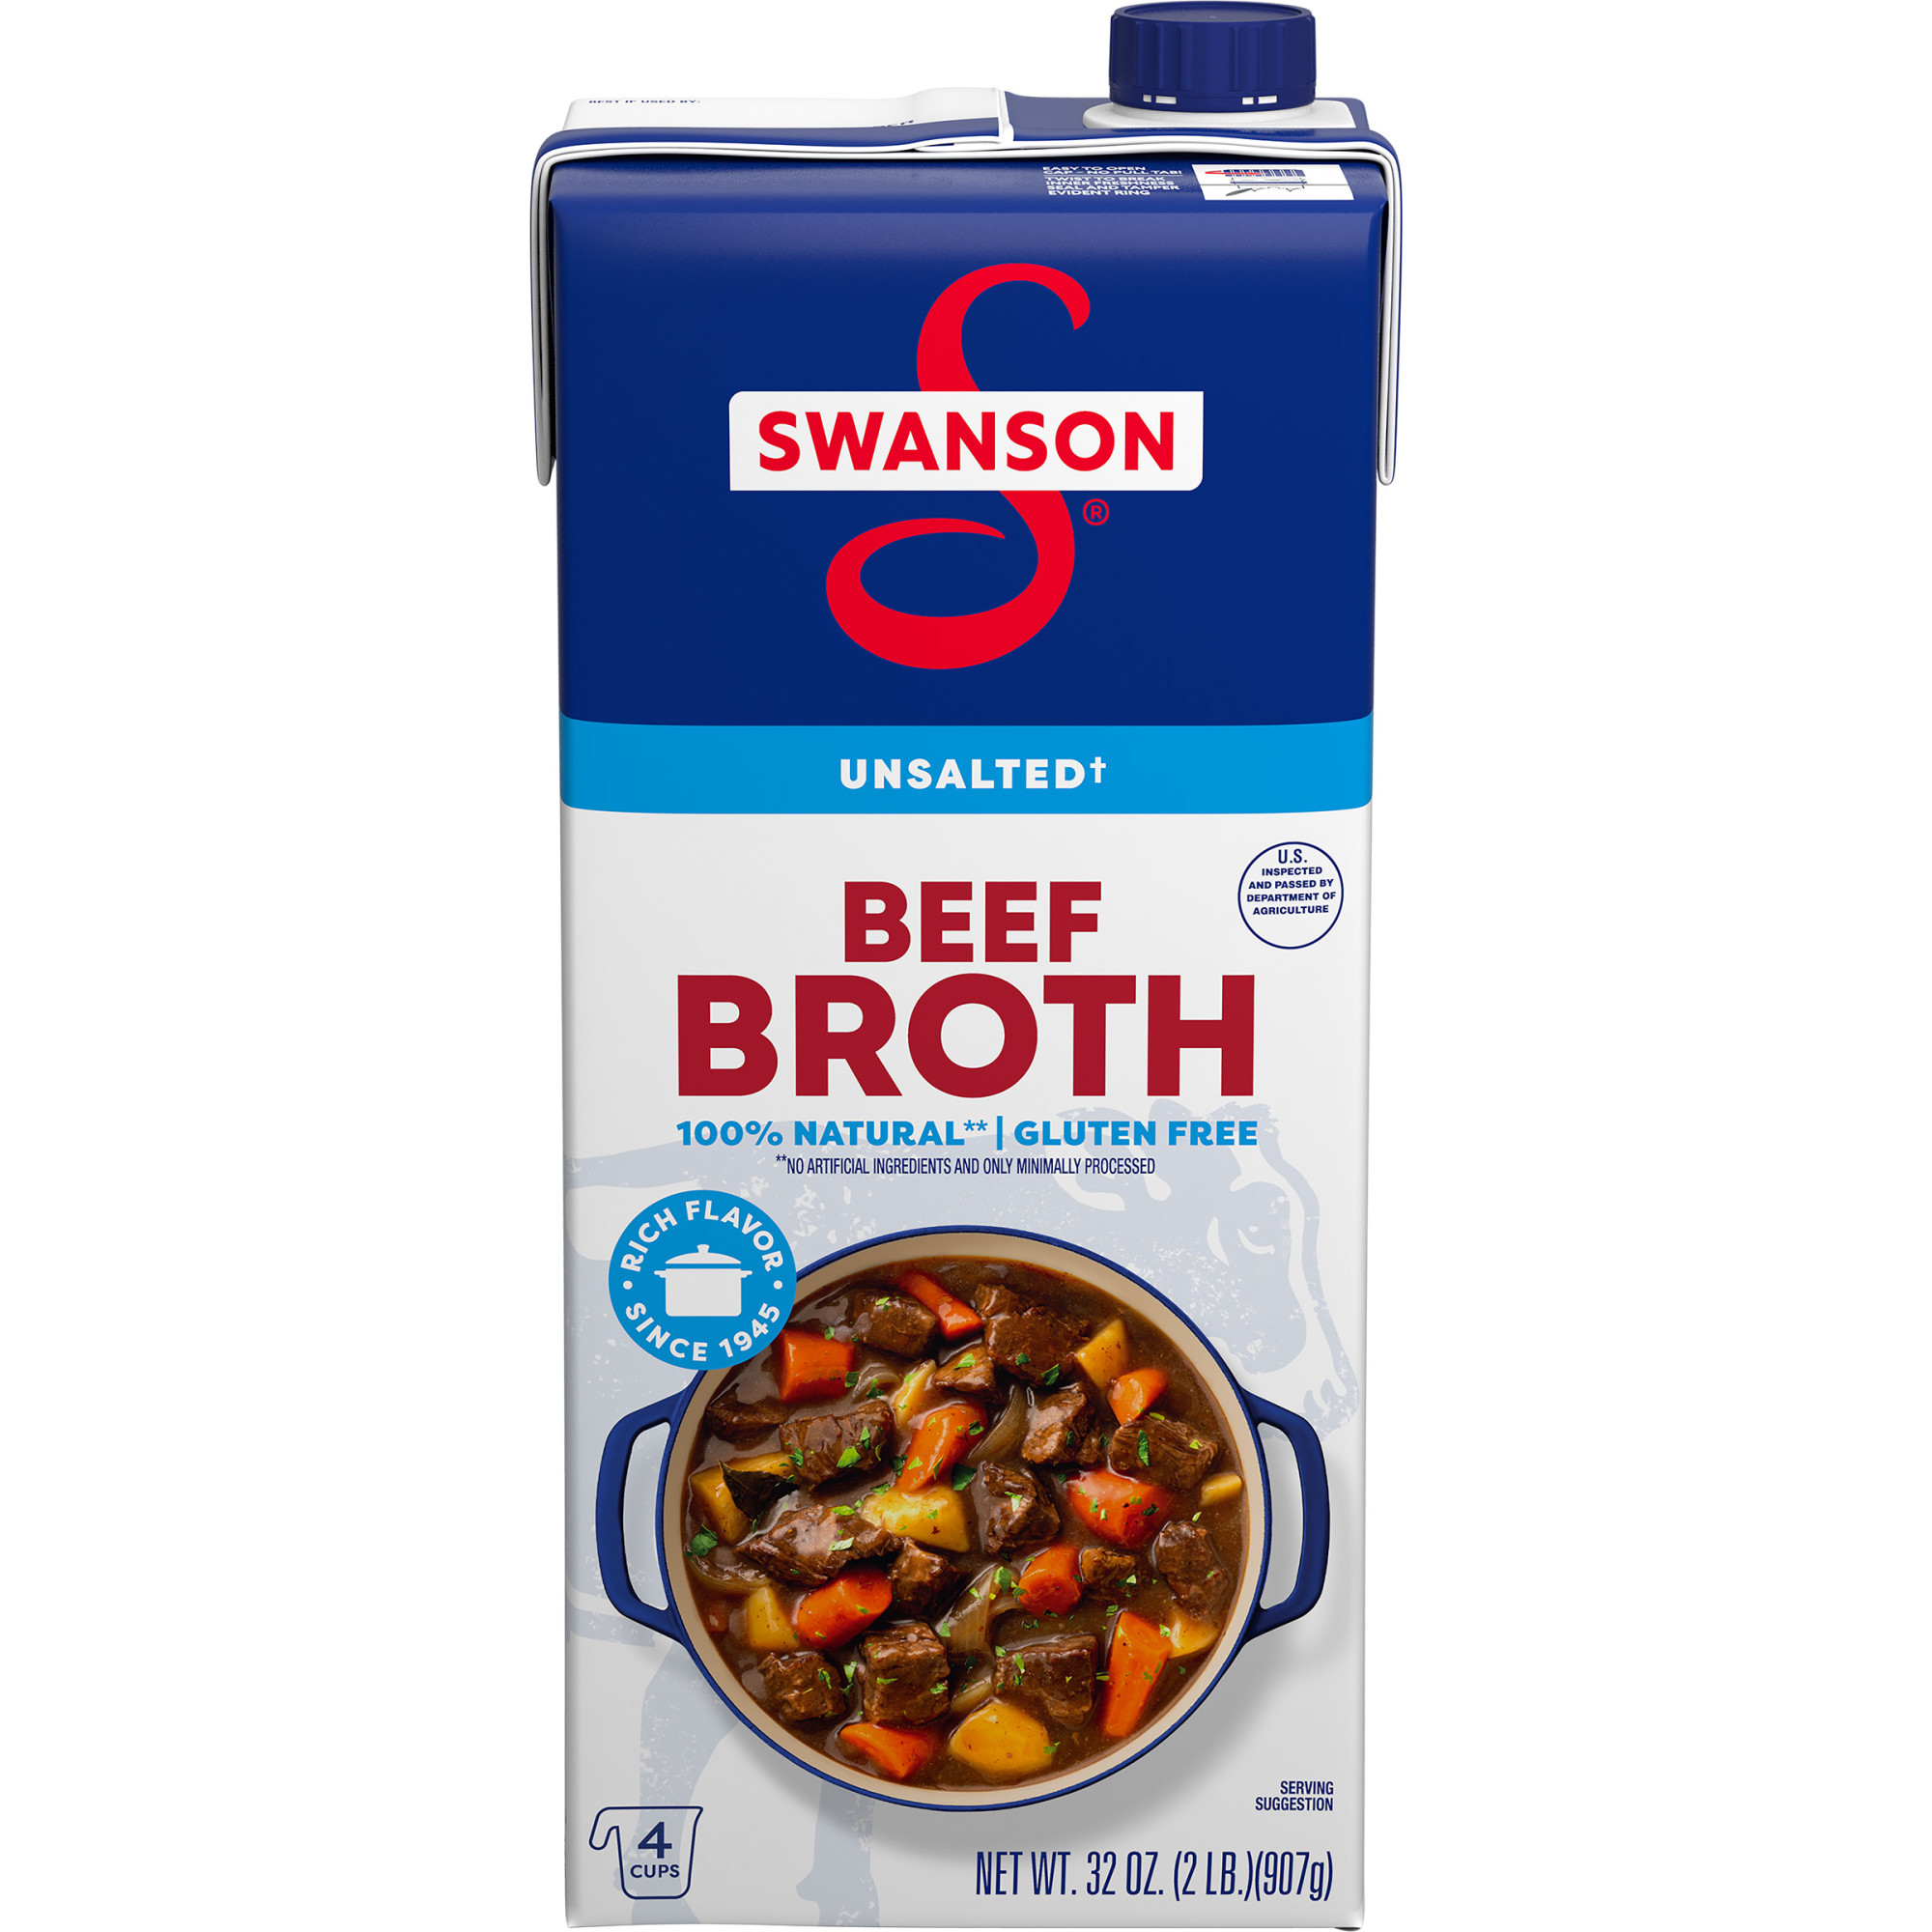 Swanson 100% Natural, Gluten-Free Unsalted Beef Broth, 32 oz Carton - image 1 of 15